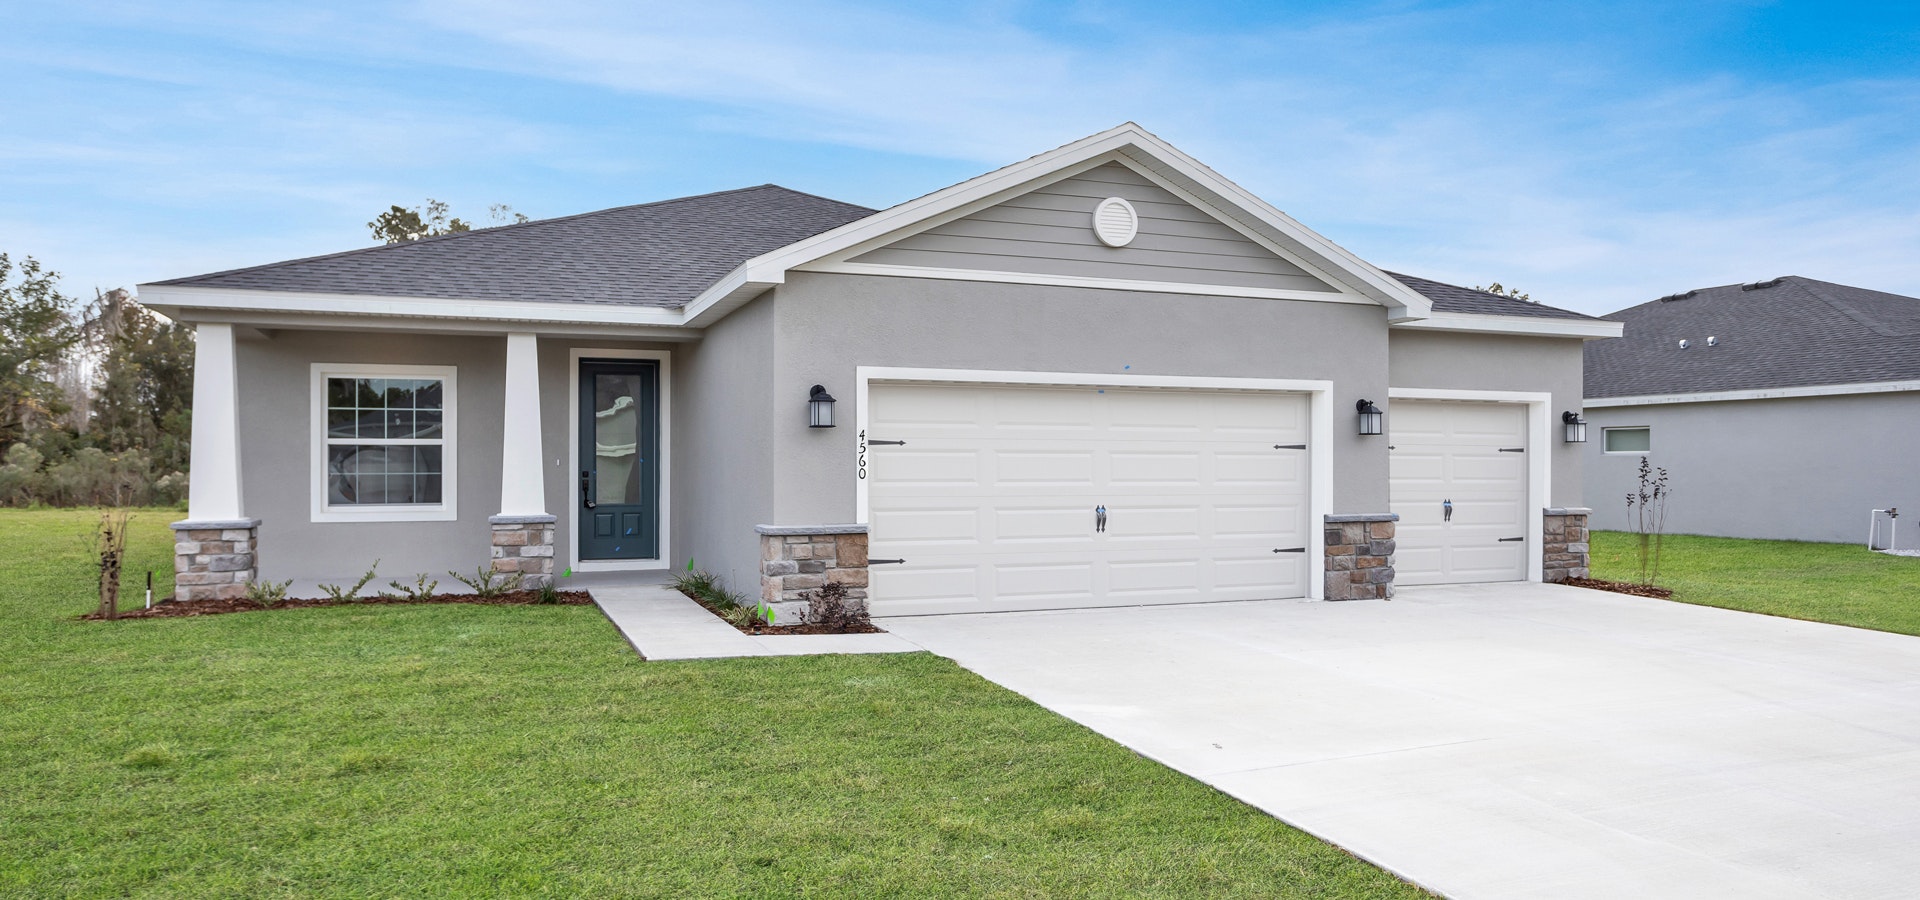 3 to 6 bedroom new construction homes are now available at Copperleaf in Ocala, FL.